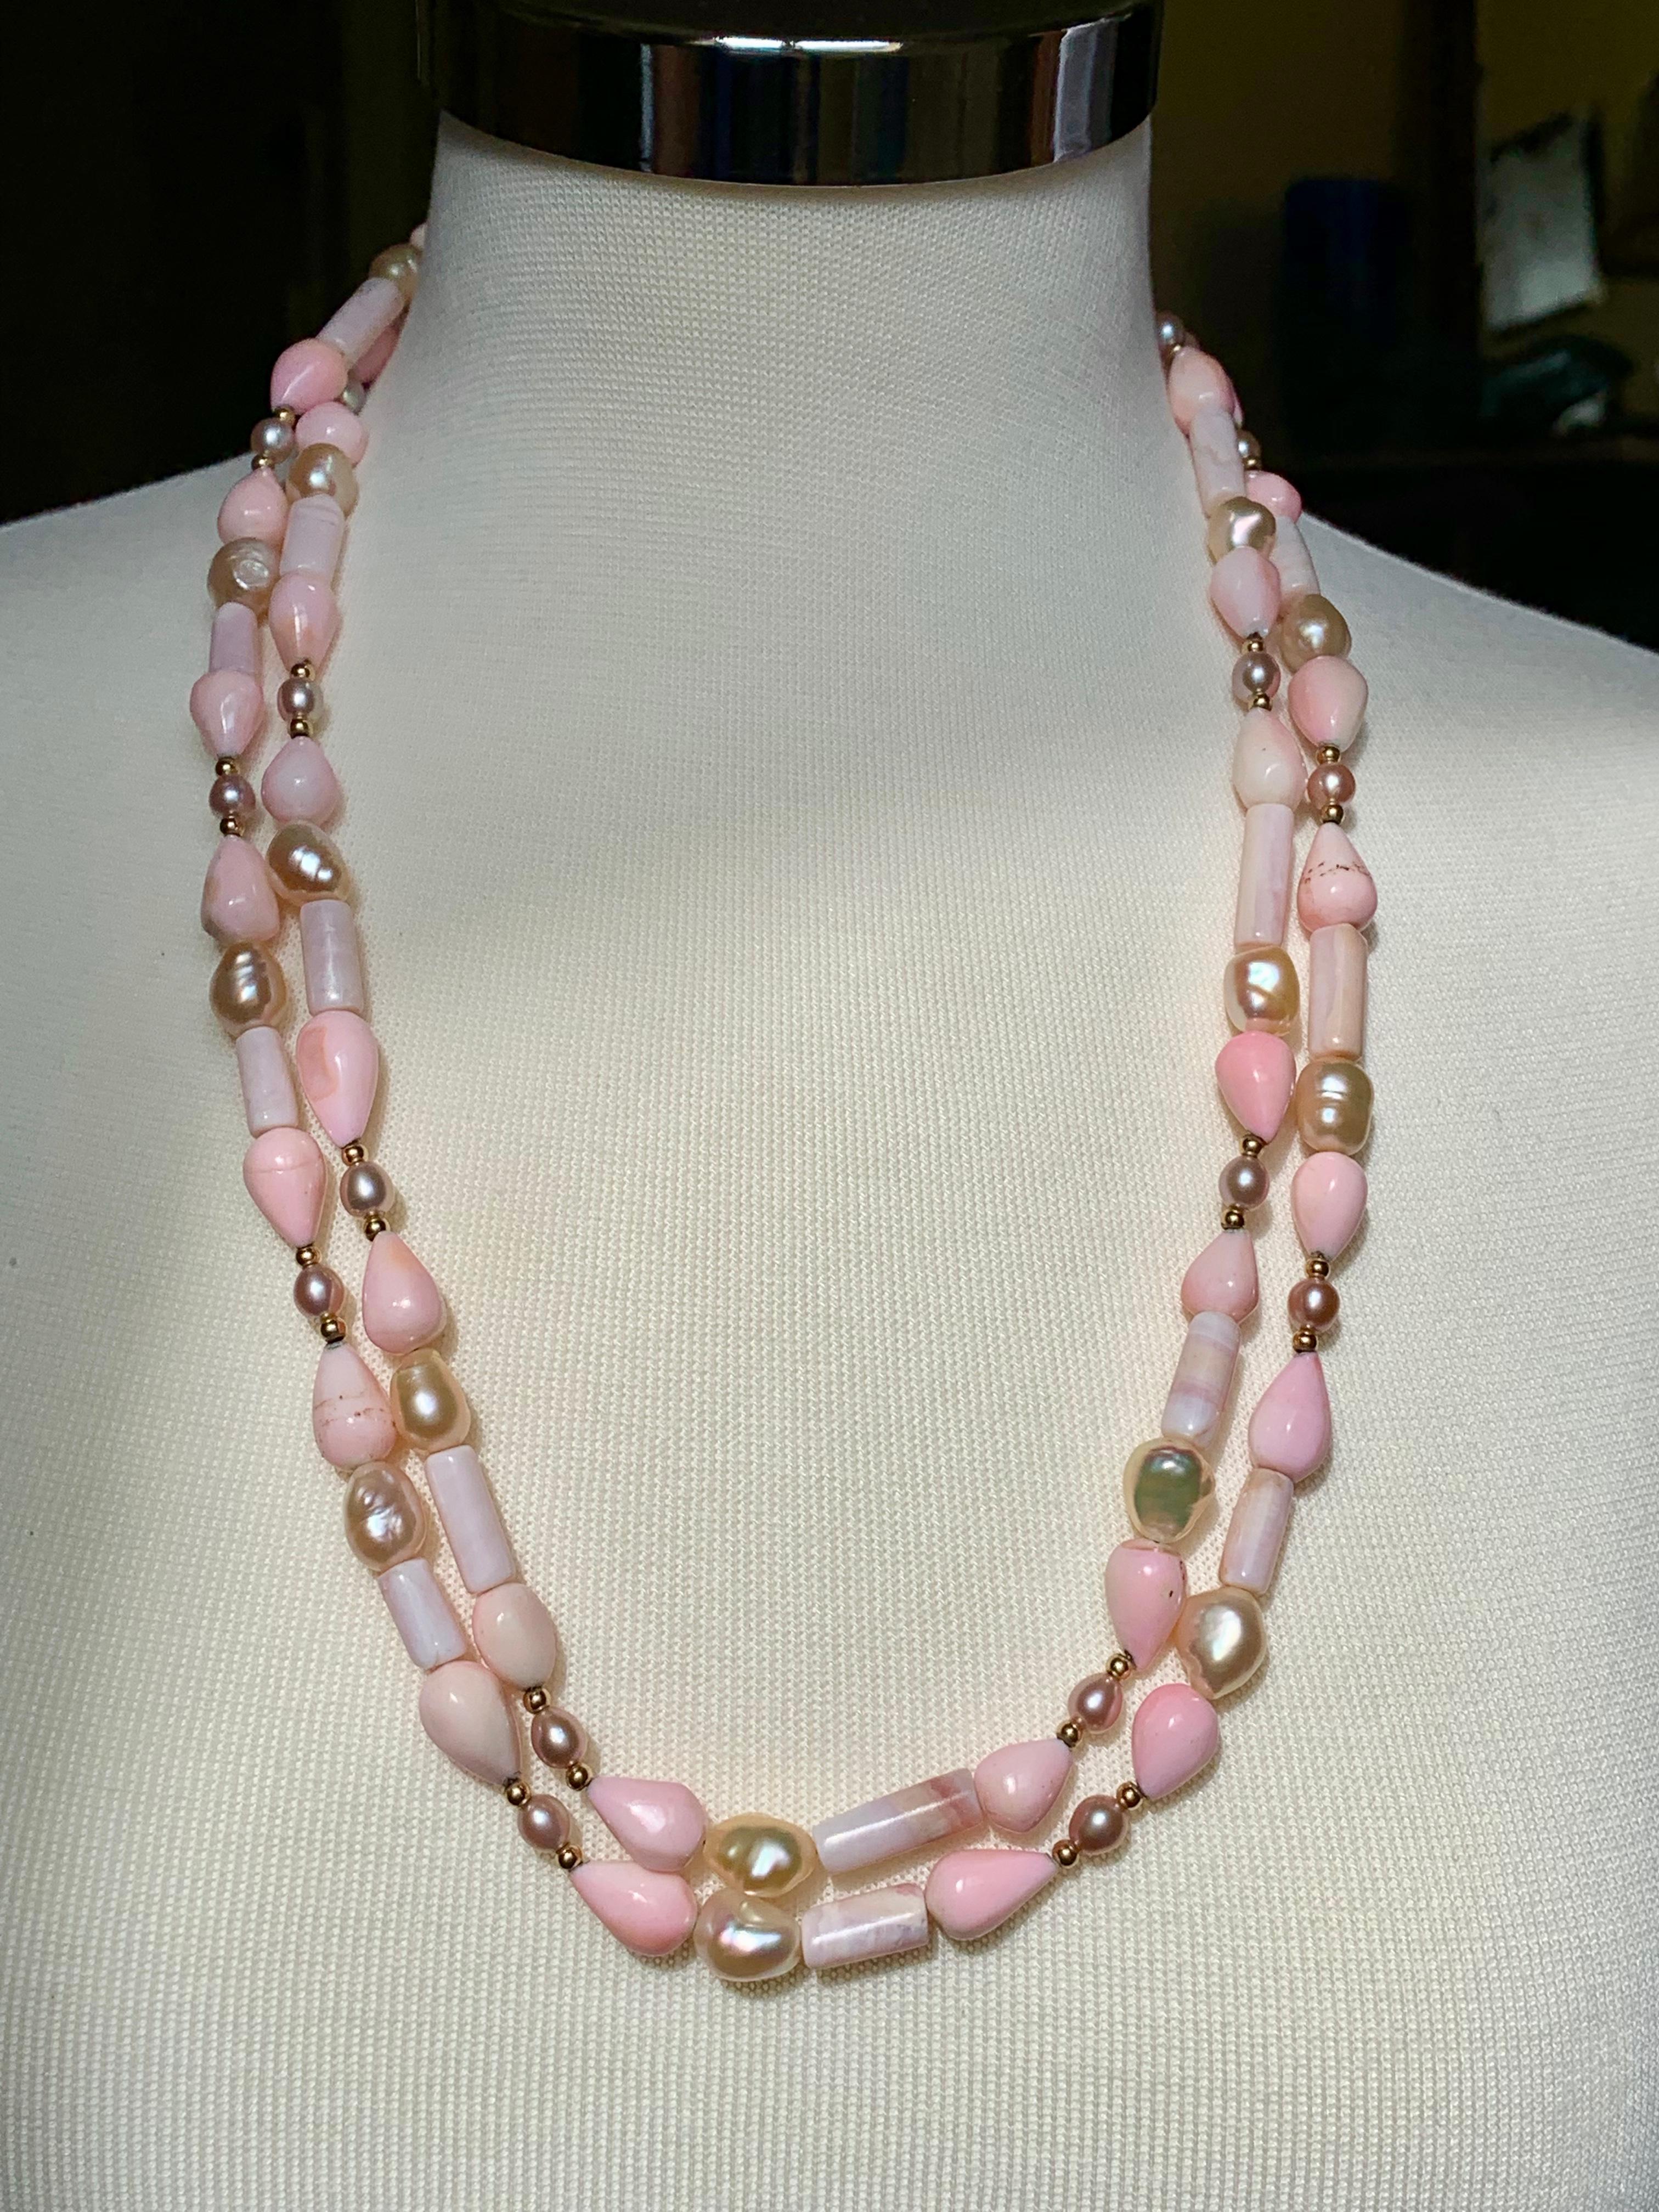 Sabrina Balsky Jewelry
One of a kind  Natural Peruvian Pink Opal Handmade Necklace with Pear shaped and tubular shaped Peruvian Opals with Natural Lustrous Baroque Freshwater Pink Pearls and Seed Pearls bordered with 14K gold beads.  53